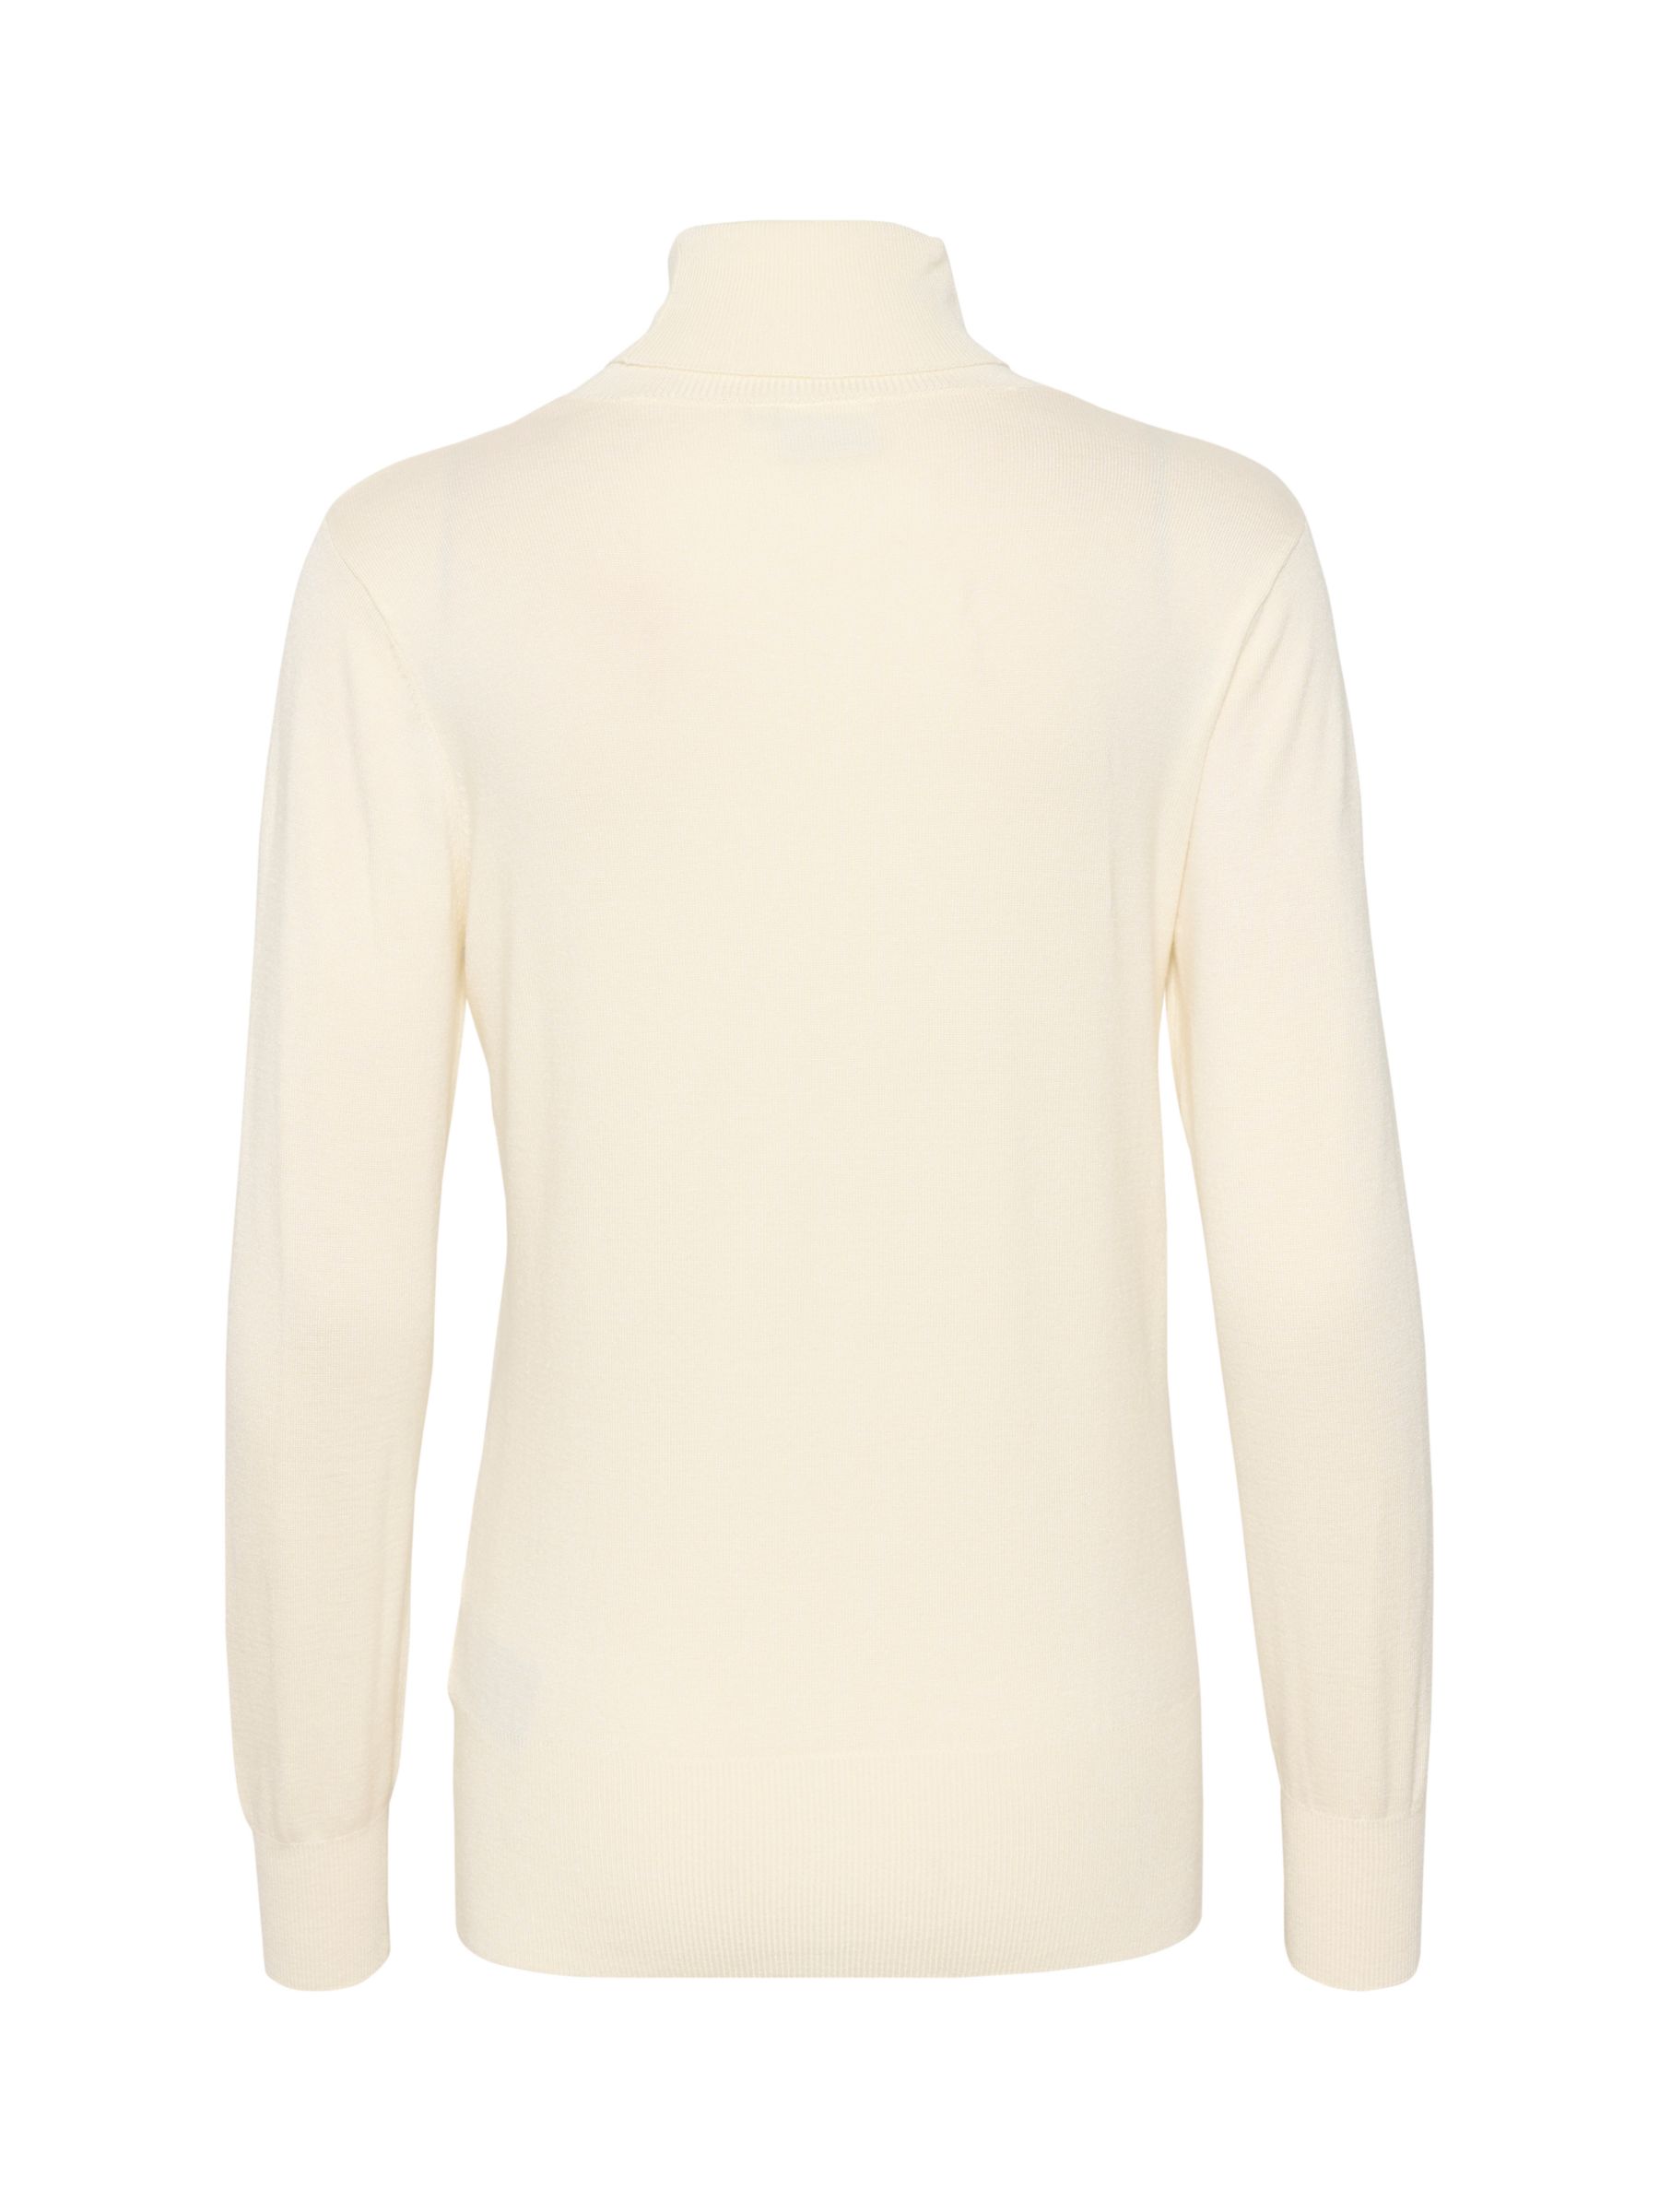 KAFFE Astrid Long Sleeve Roll Neck Pullover Jumper, Antique White at ...